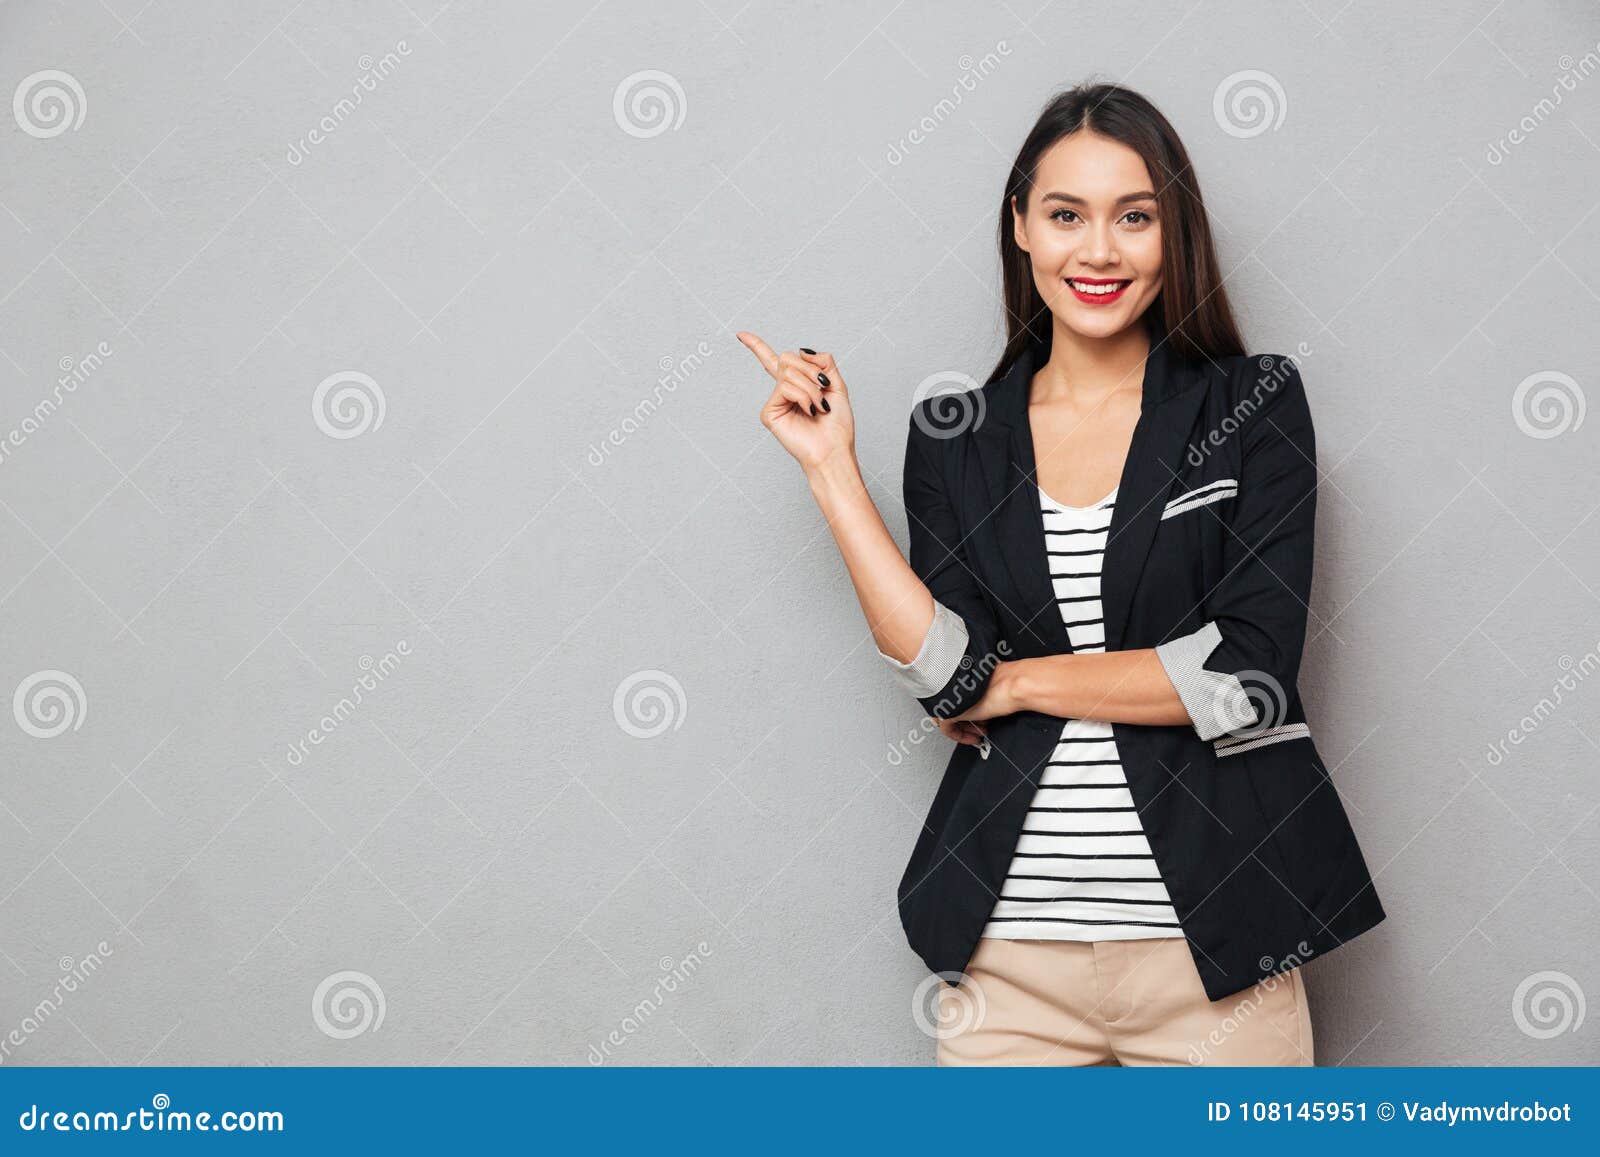 smiling asian business woman pointing up and looking at camera